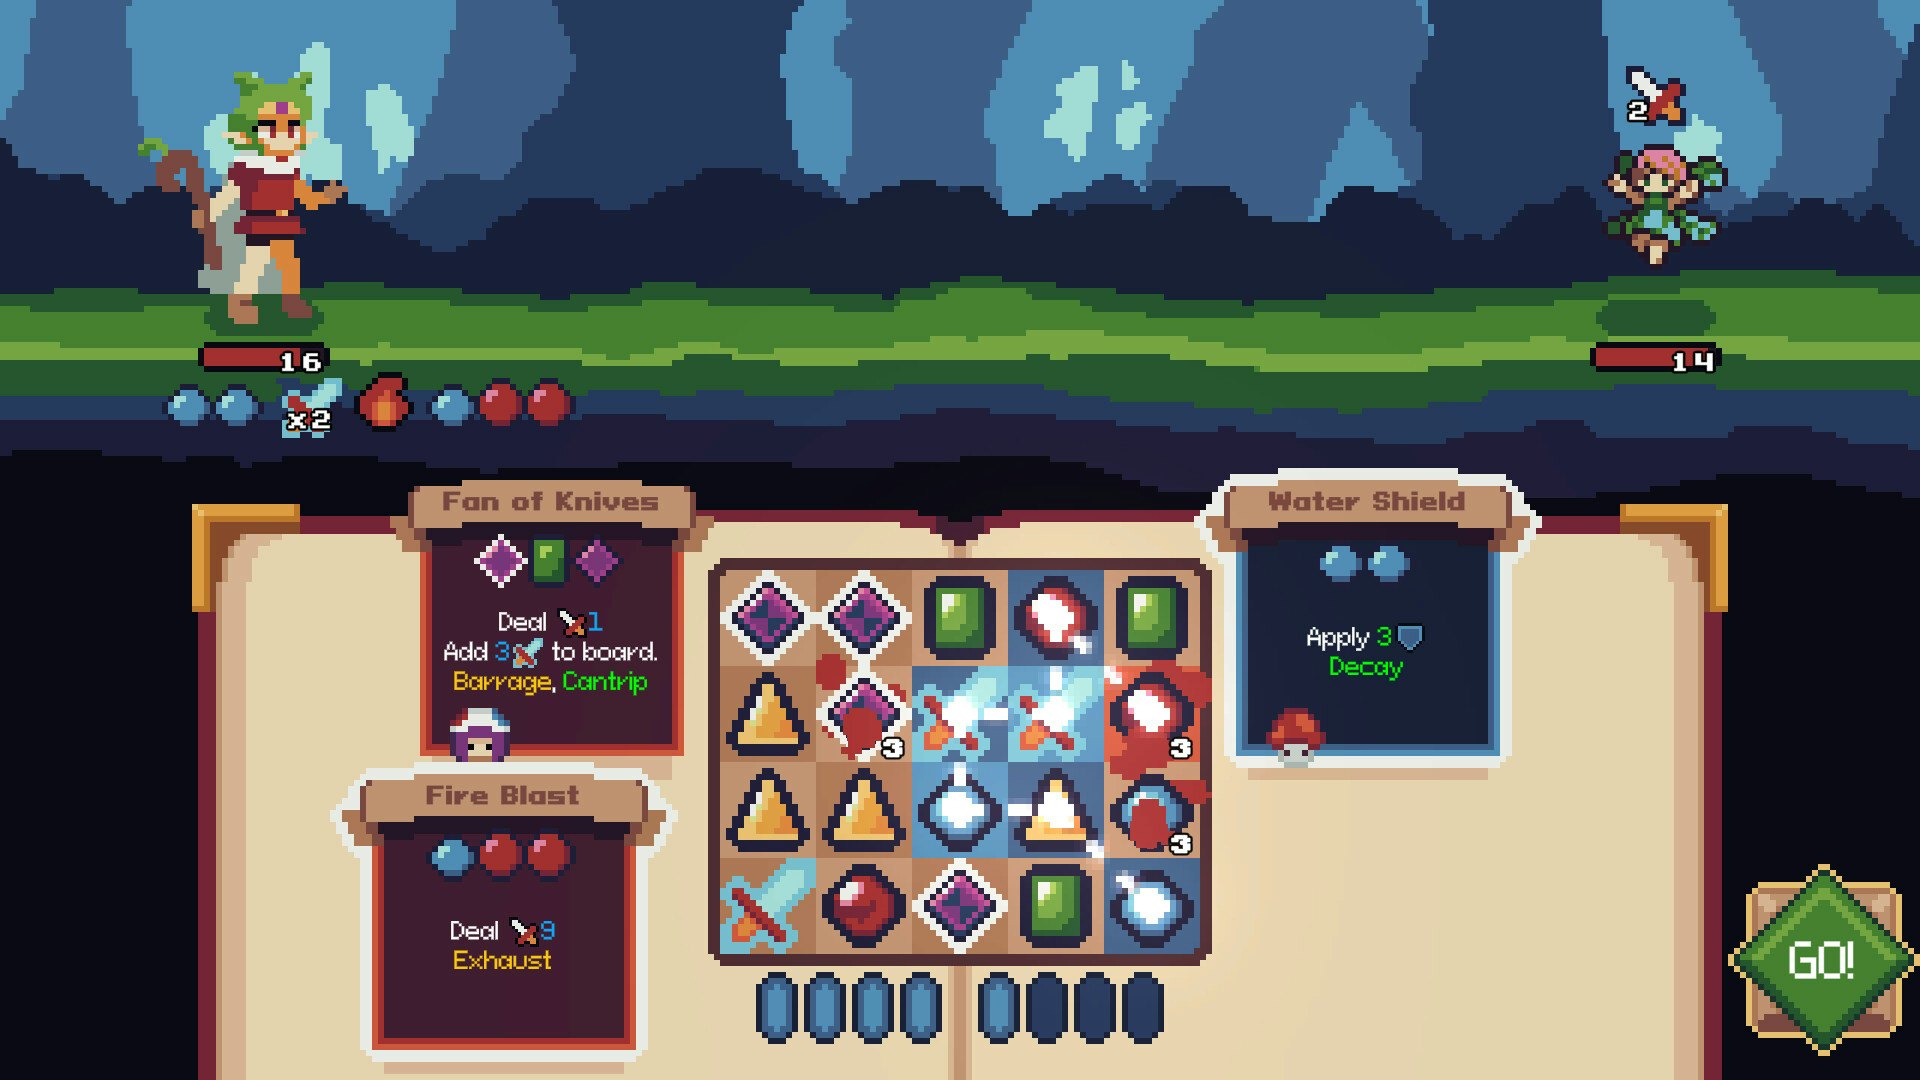 'Slay the Spire' Meets 'Candy Crush' In the Roguelike Demo I Can’t Stop Playing